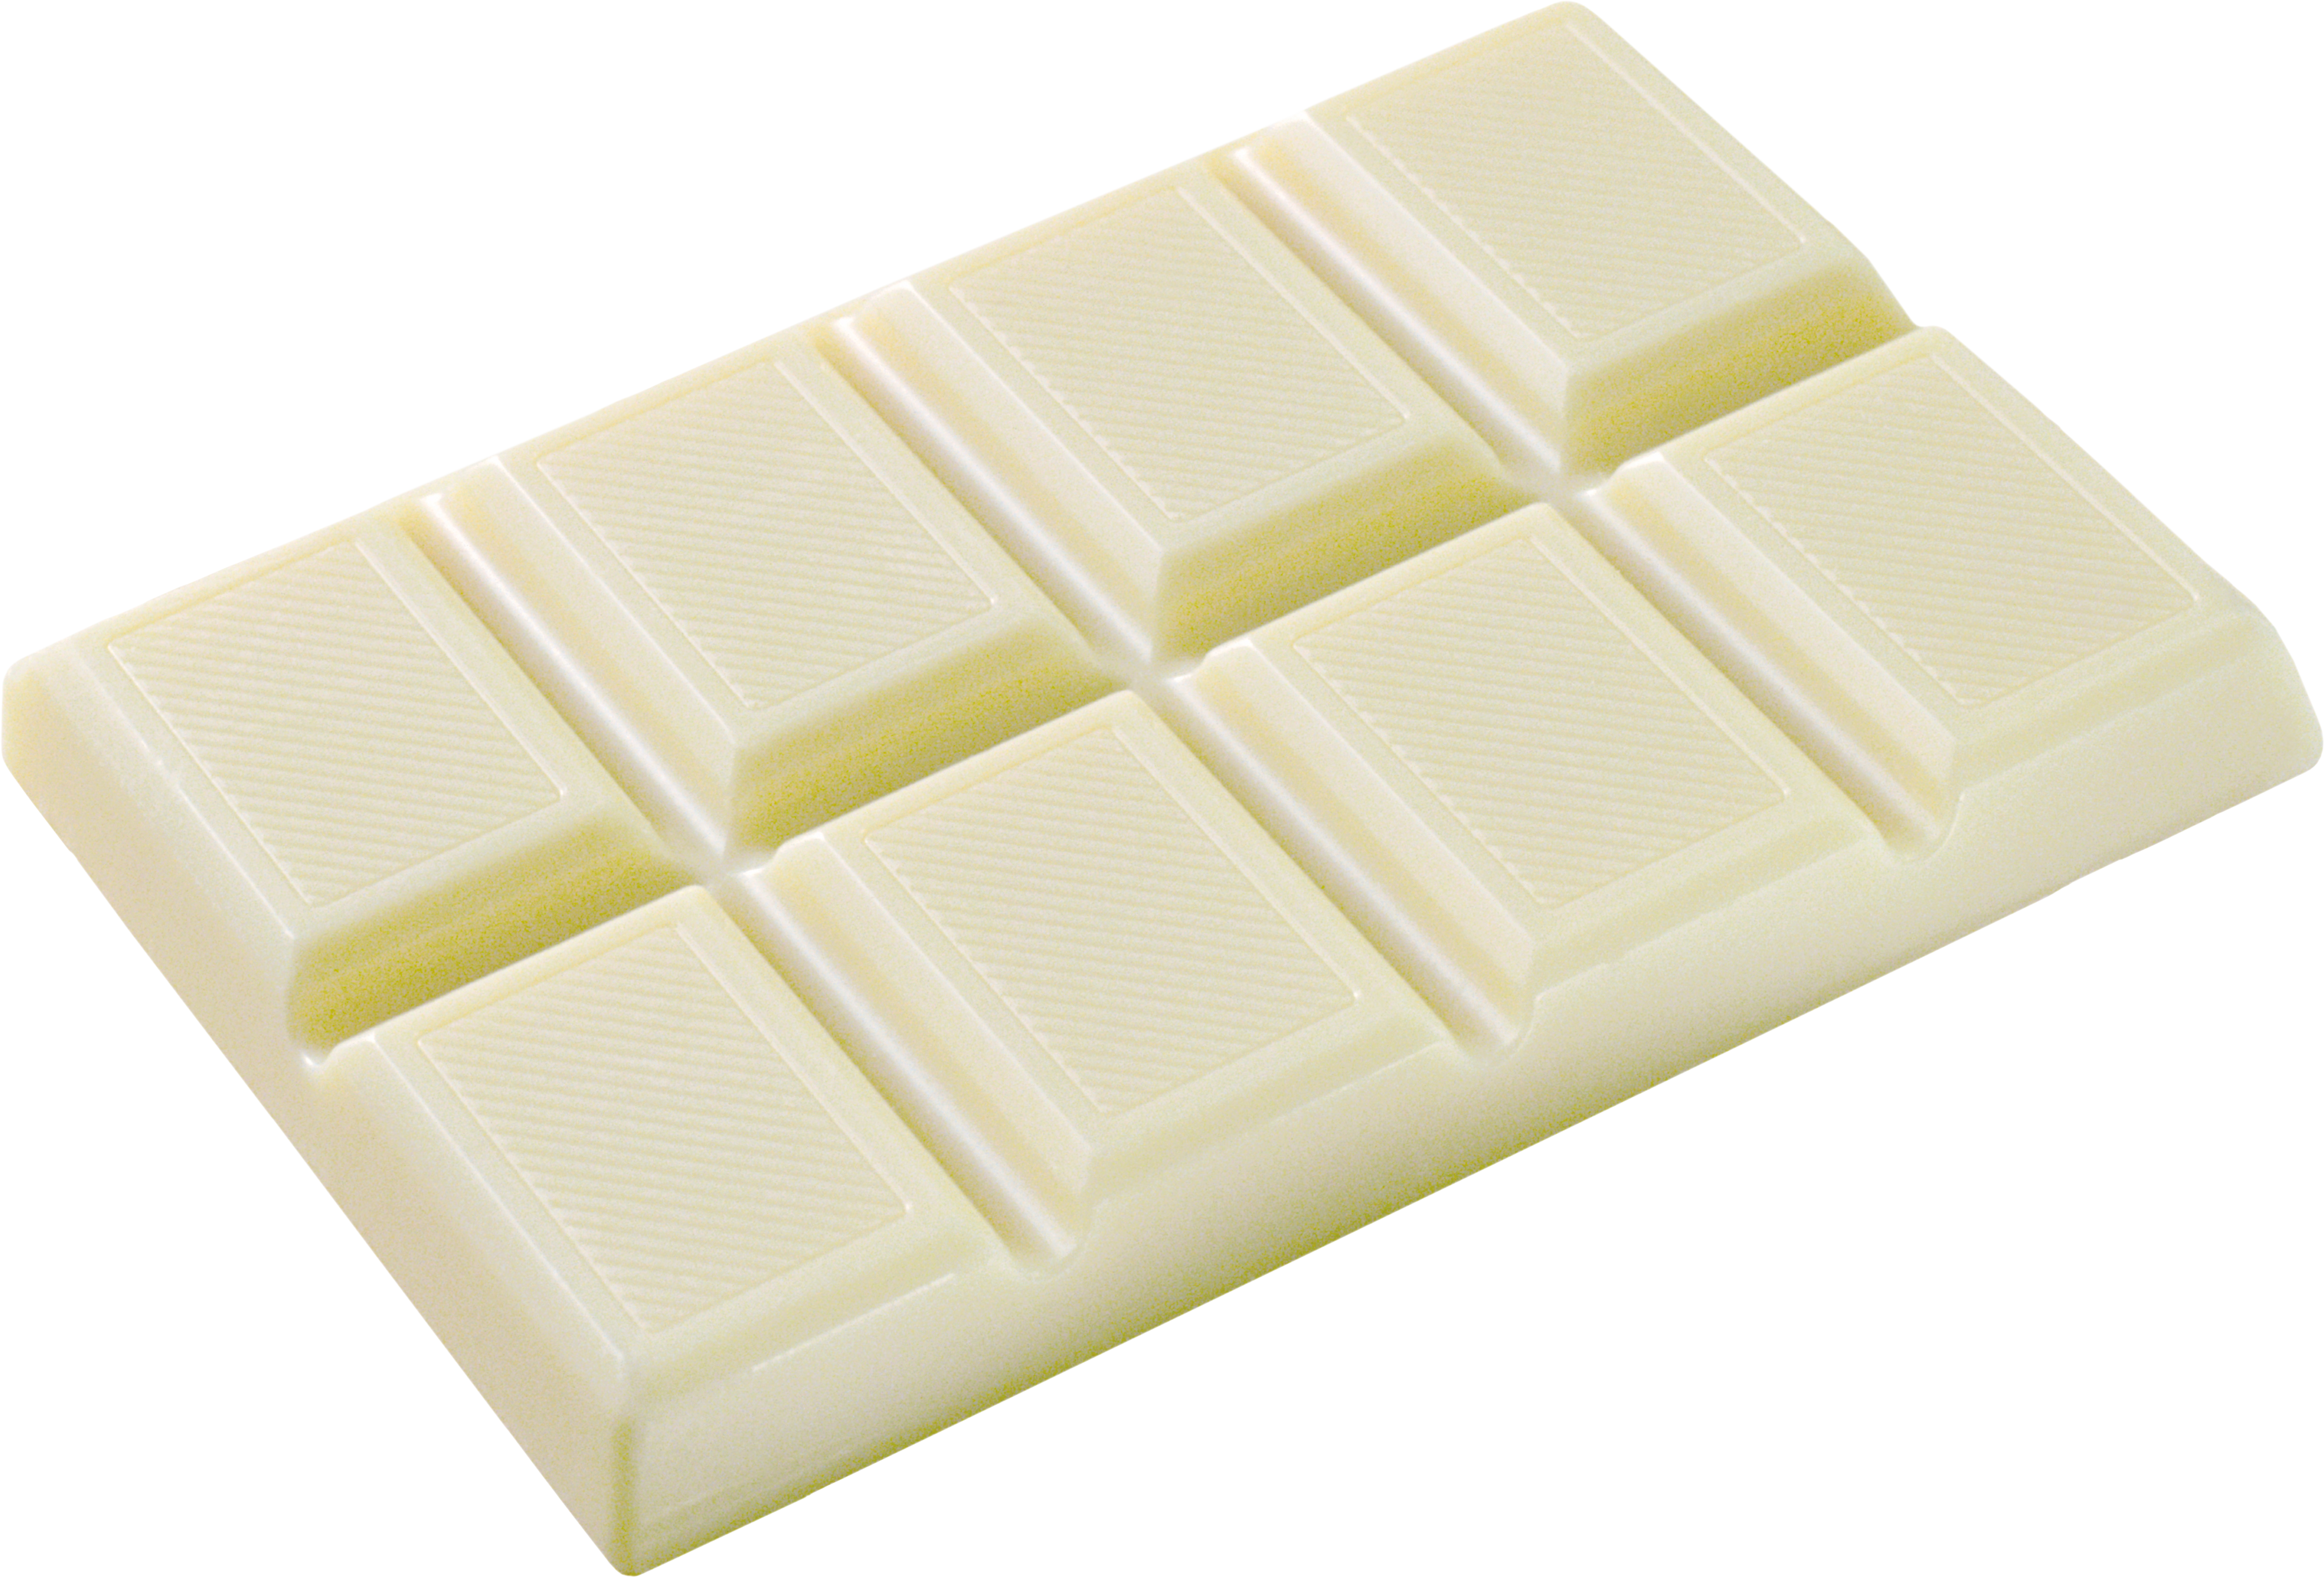 White chocolate PNG